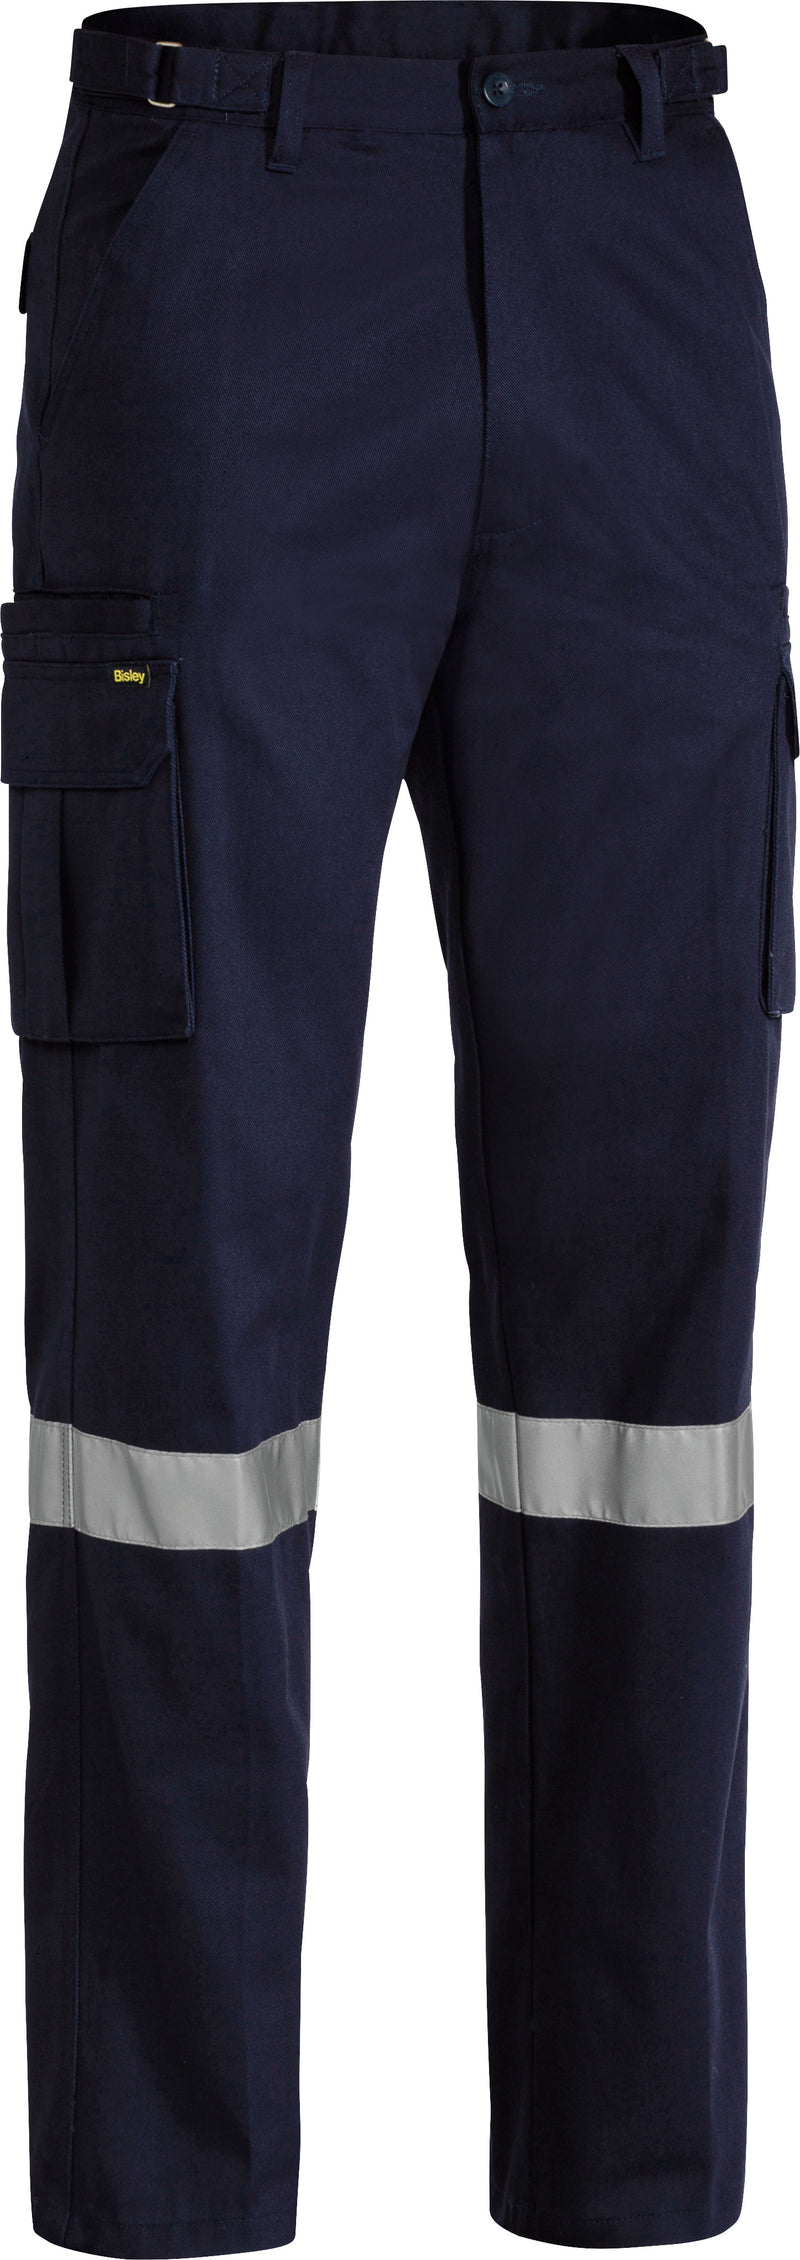 Load image into Gallery viewer, Wholesale BPC6007T Bisley 8 Pocket Cargo Pant 3M Reflective Tape - Long Printed or Blank
